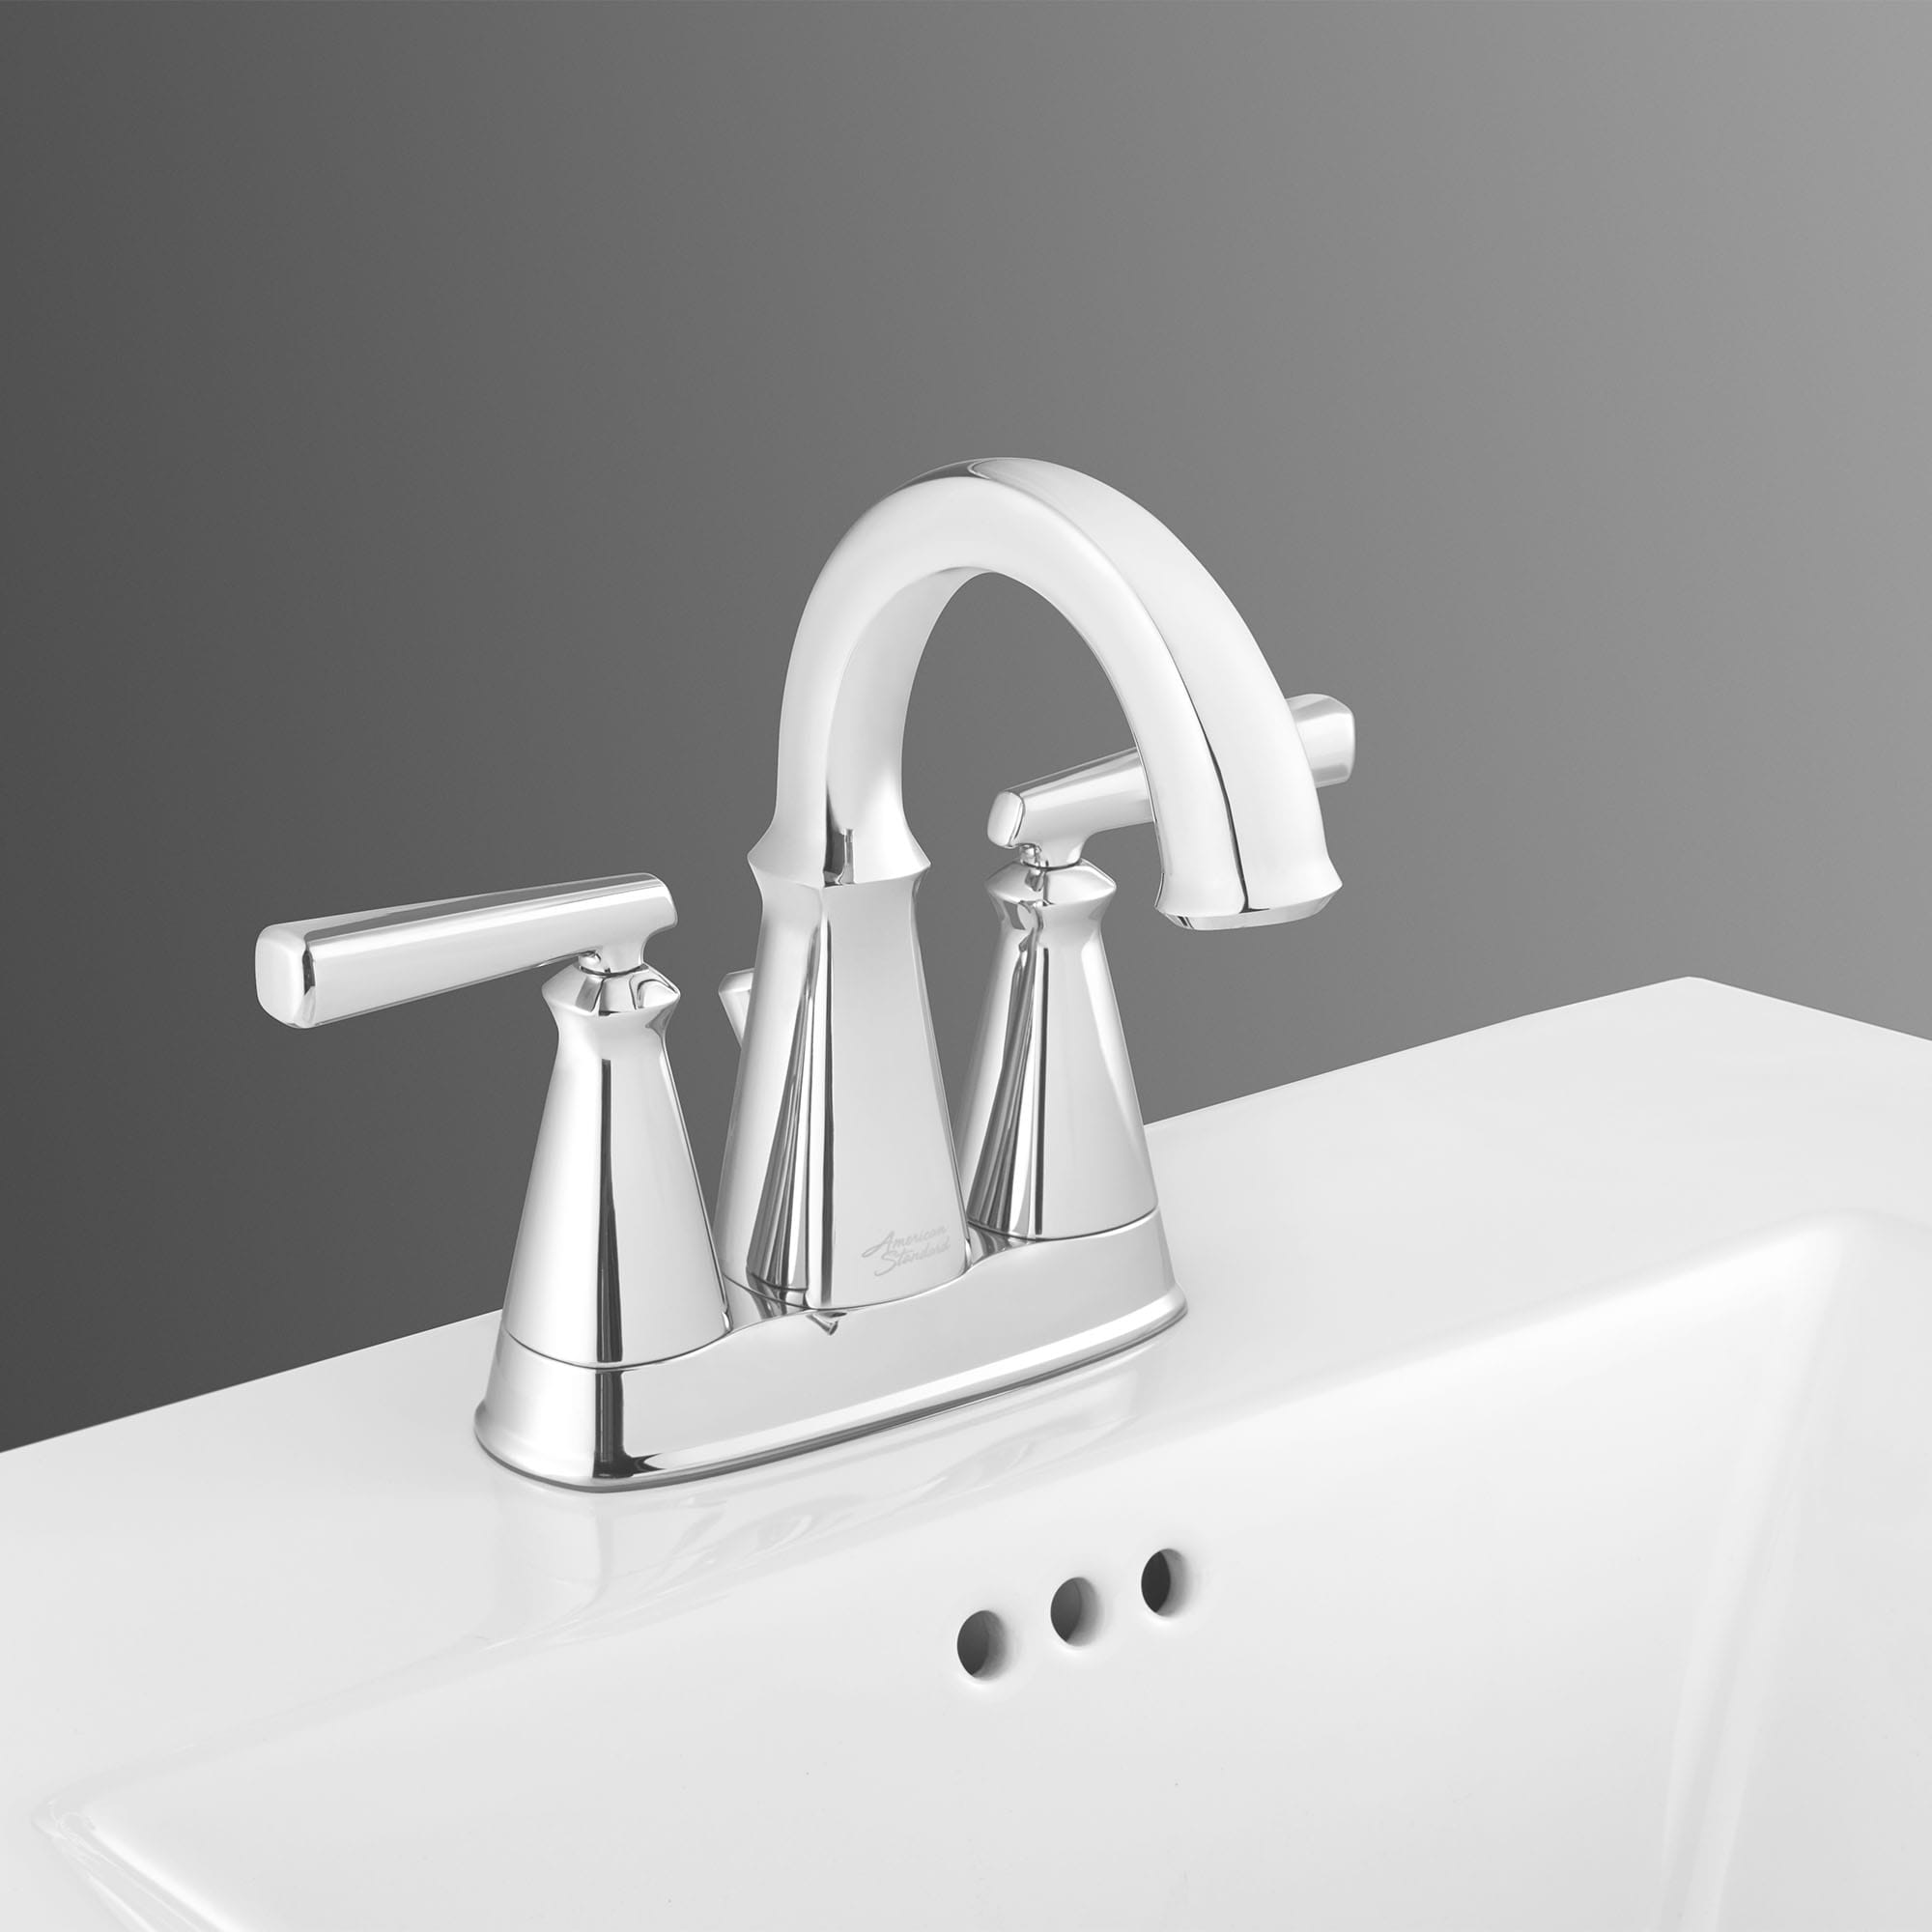 Edgemere® 4-Inch Centerset 2-Handle Bathroom Faucet 1.2 gmp/4.5 L/min With Lever Handles